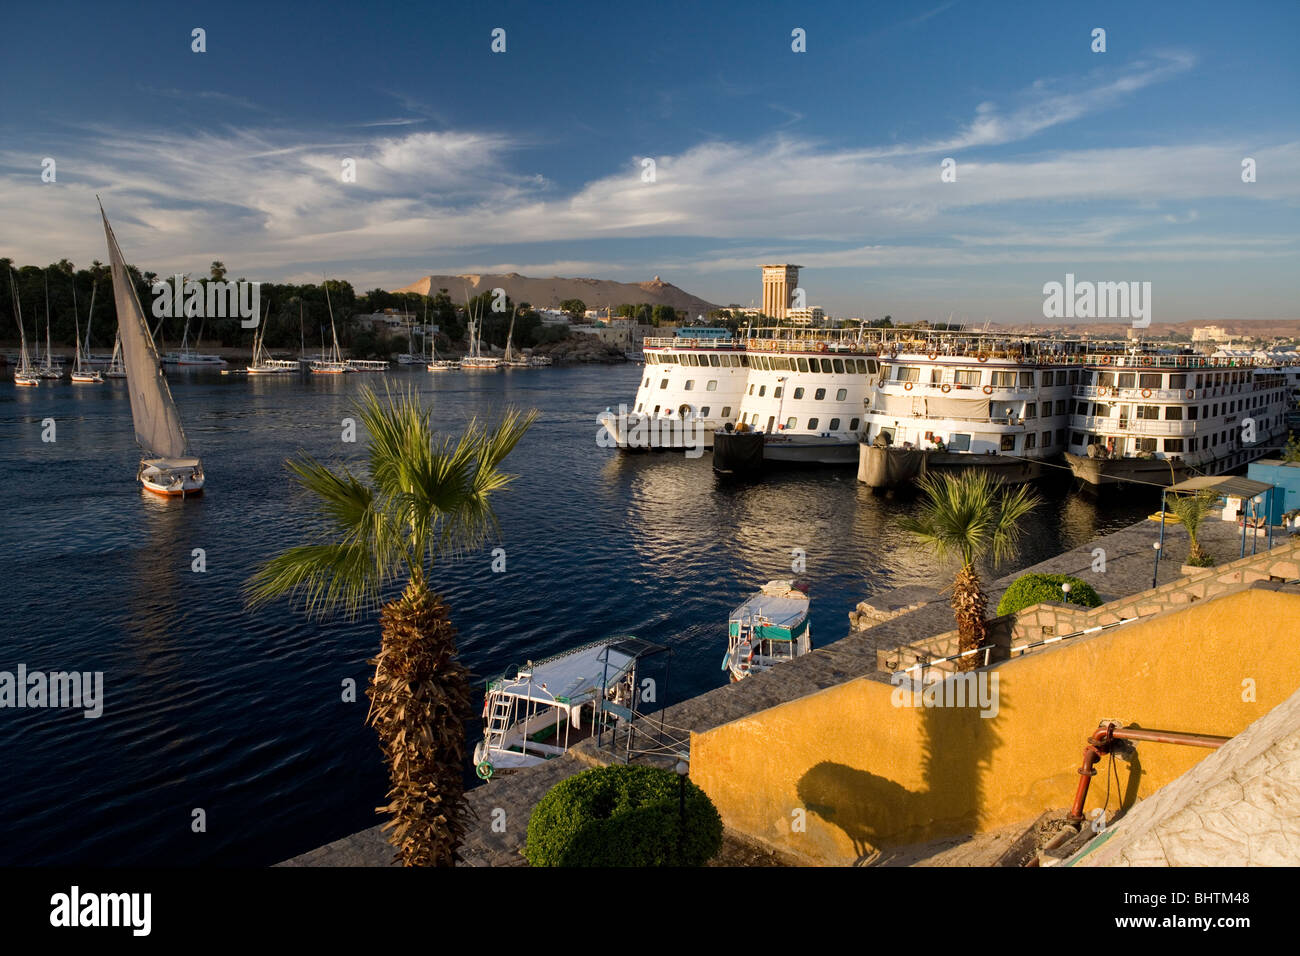 Cruise ships docked on the river Nile in Aswan, Egypt. Stock Photo